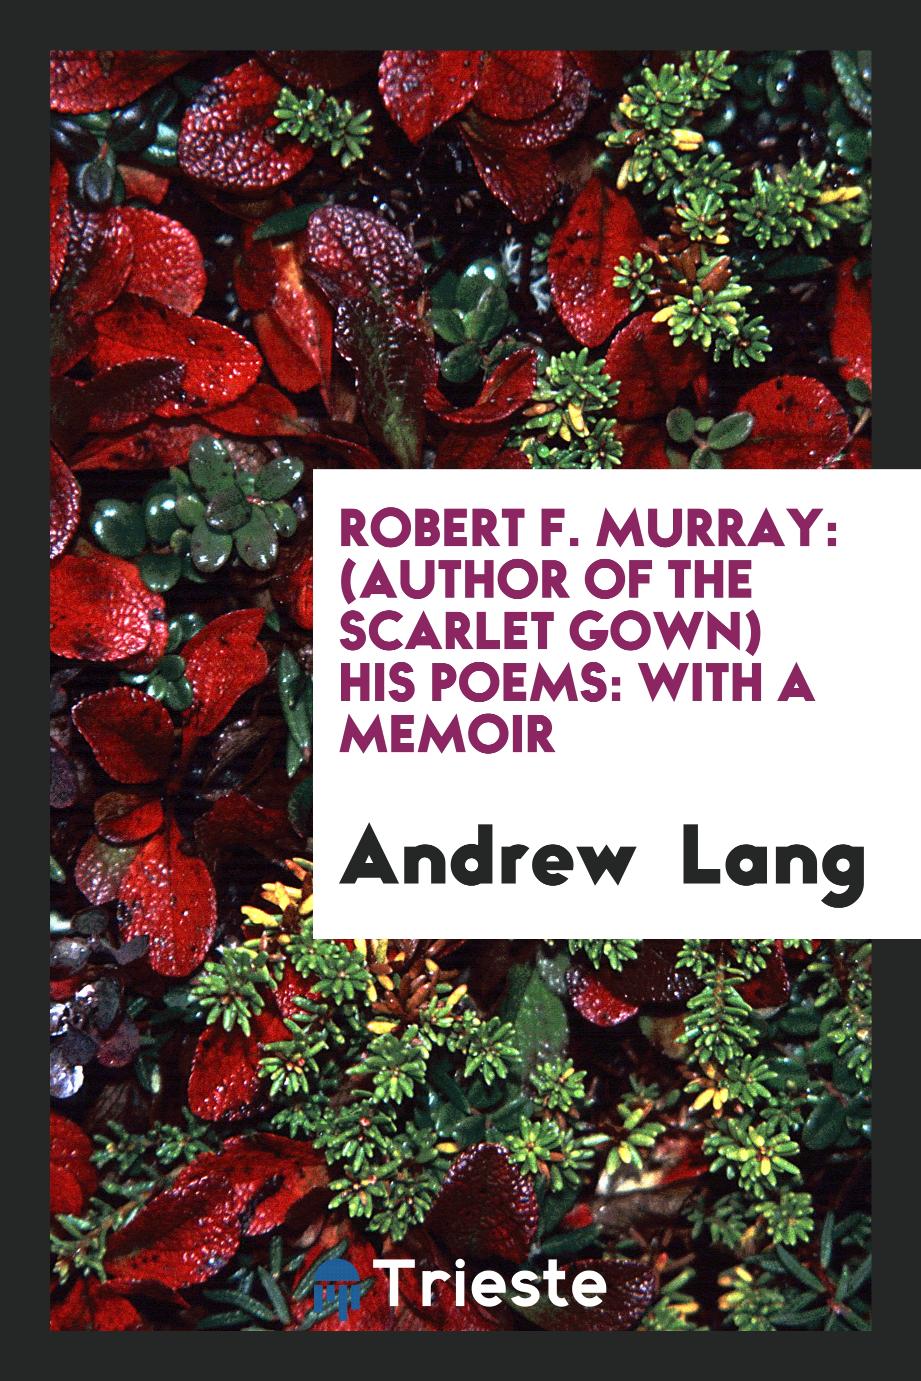 Robert F. Murray: (Author of the Scarlet Gown) His Poems: With a Memoir